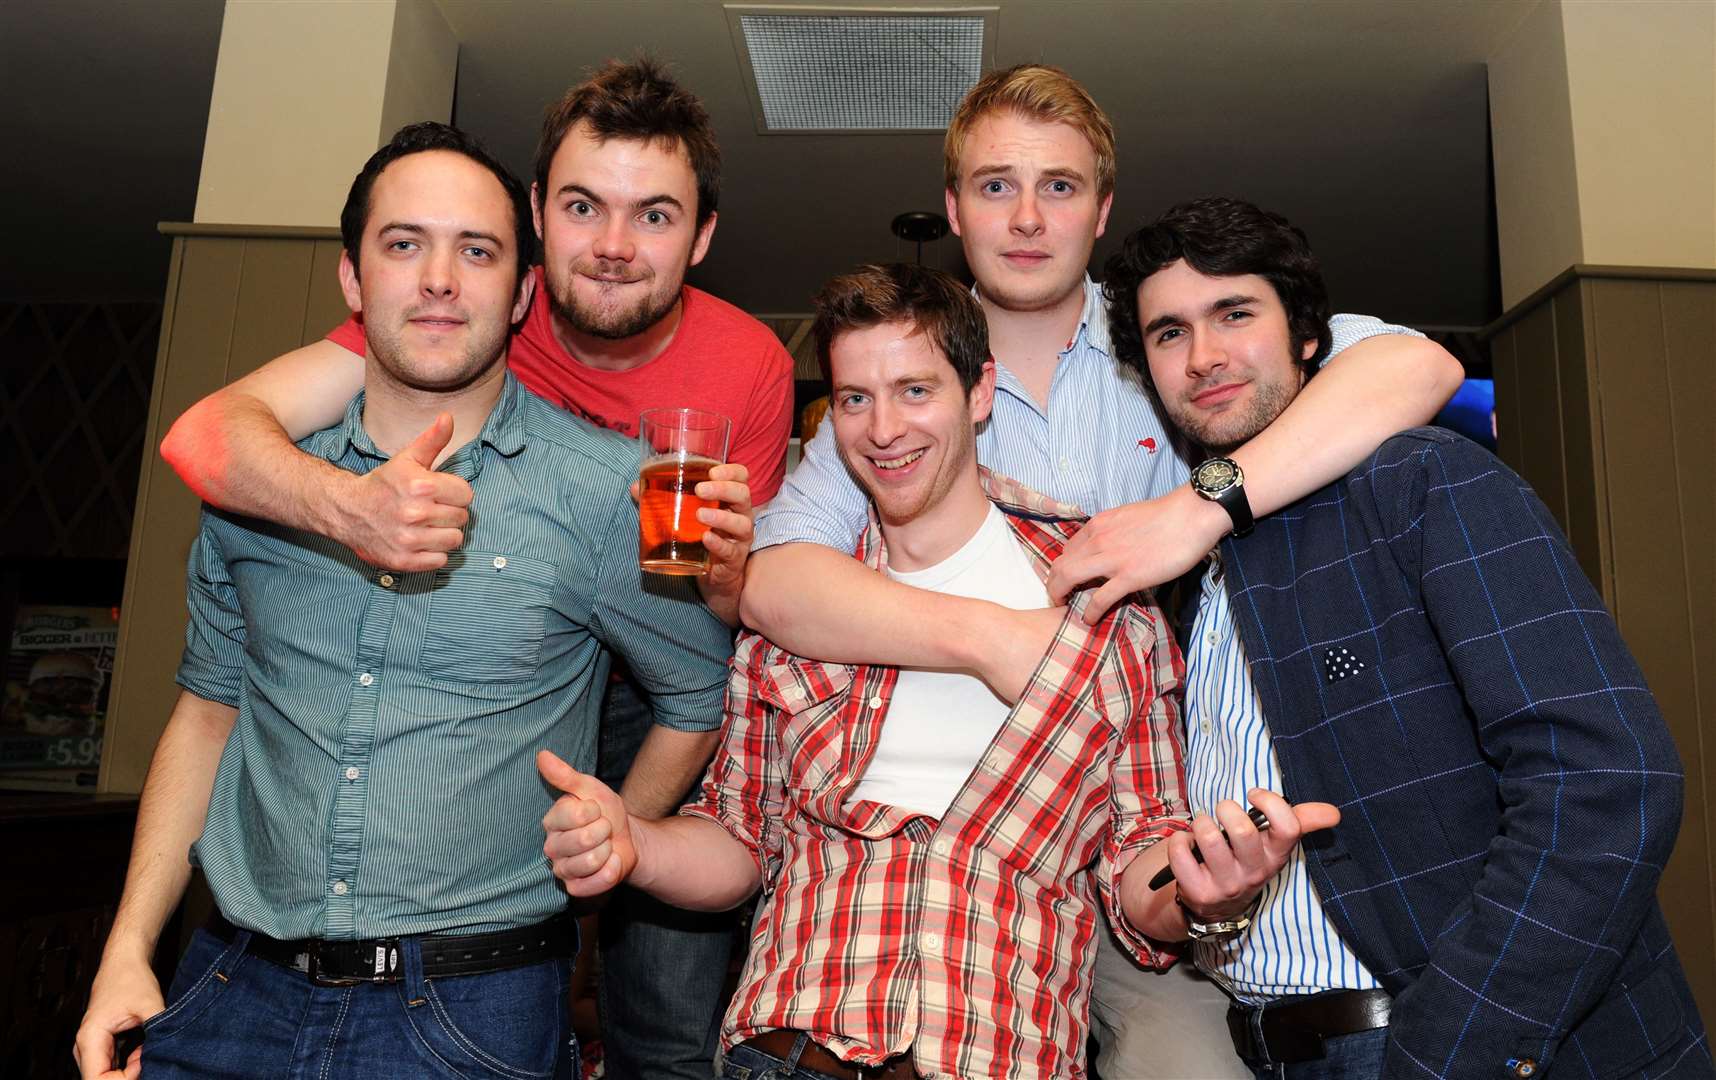 Cityseen 15th Oct 2011. Colin Collins (far right) in Smith & Jones with mates for his 25th birthday..